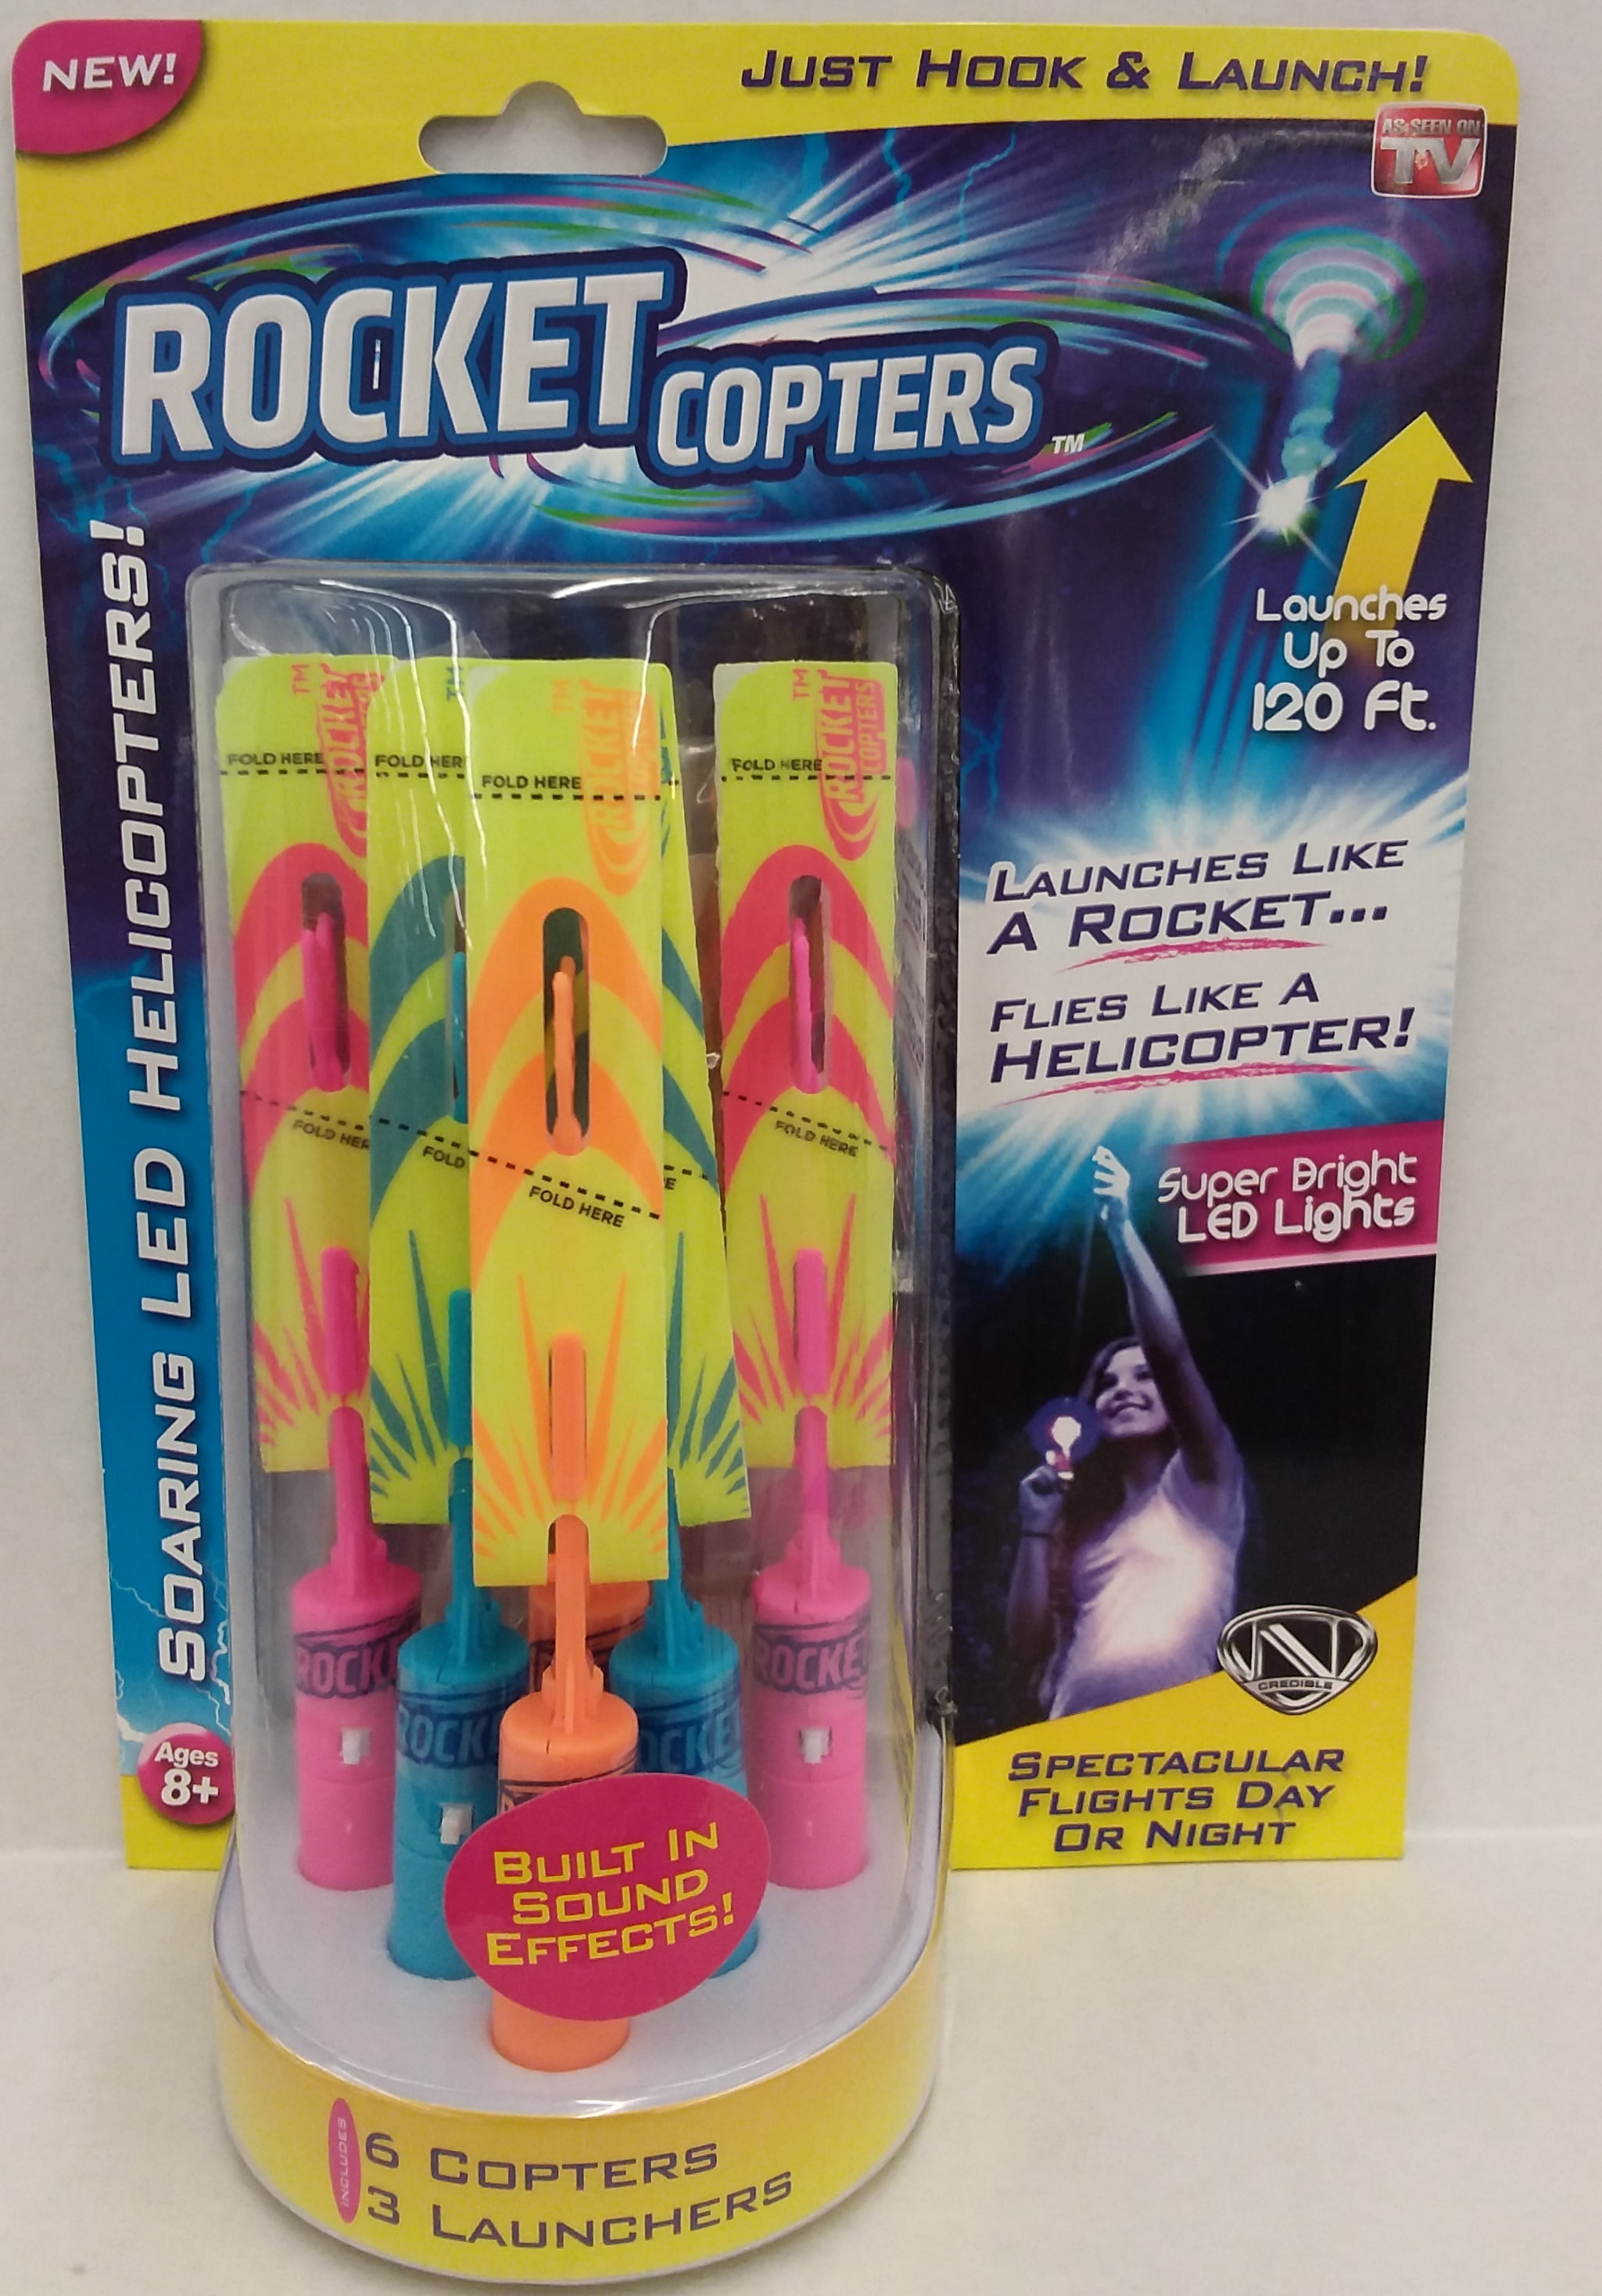 Rocket Copters LED Patriotic Outdoor Toy 6 Copters 3 Launchers ROCKCPTR 